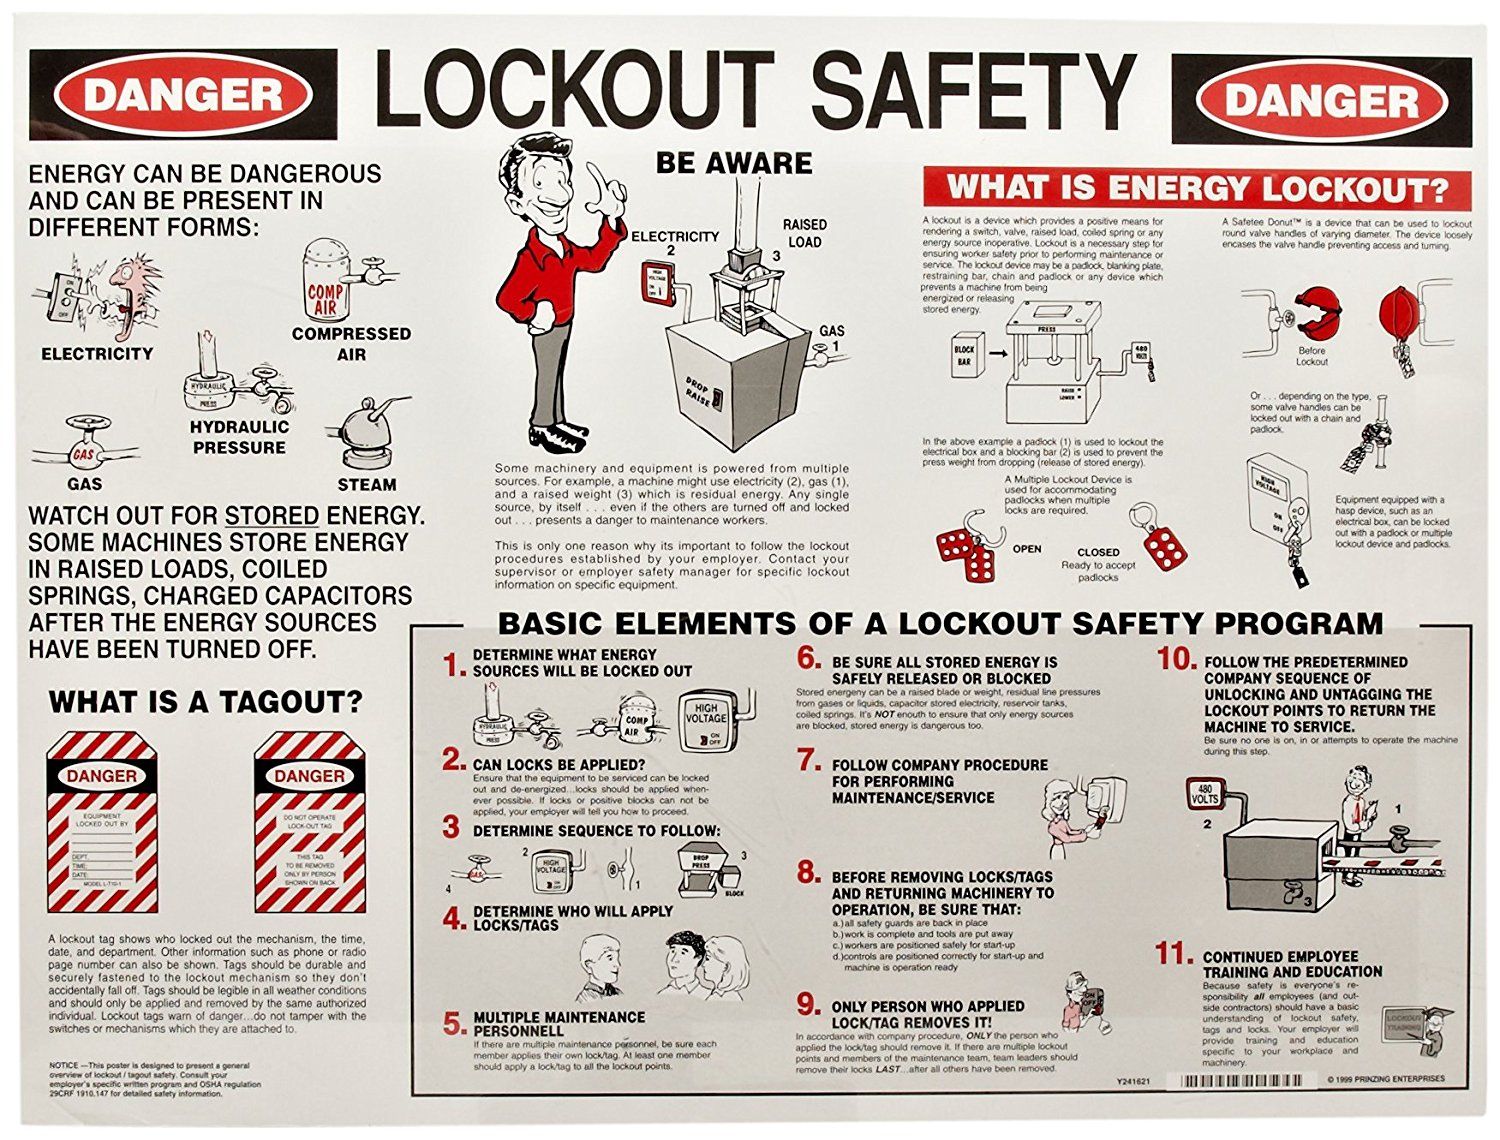 LOTO (Lock Out, Tag Out) - Safety - Naval Postgraduate School